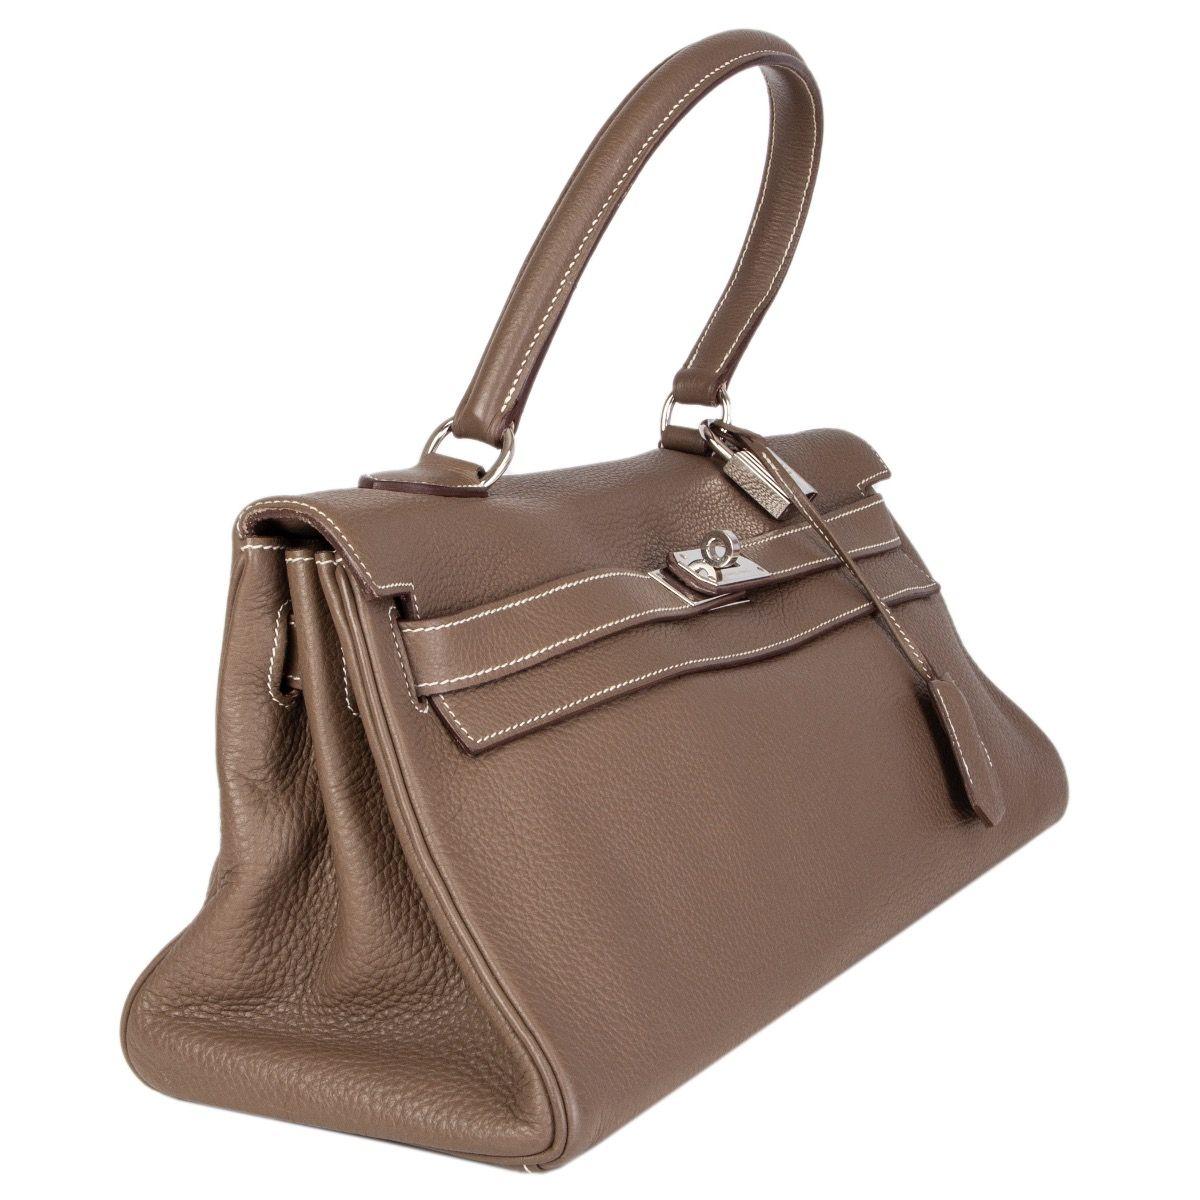 Hermes 'JPG Kelly 42' in Etoupe (taupe) Taurillon Clemence leather with contrasting white stitching. Opens with a turn-lock and straps on the front. Lined in Chevre (goat skin) with two open pockets against the front and a zipper pocket against the